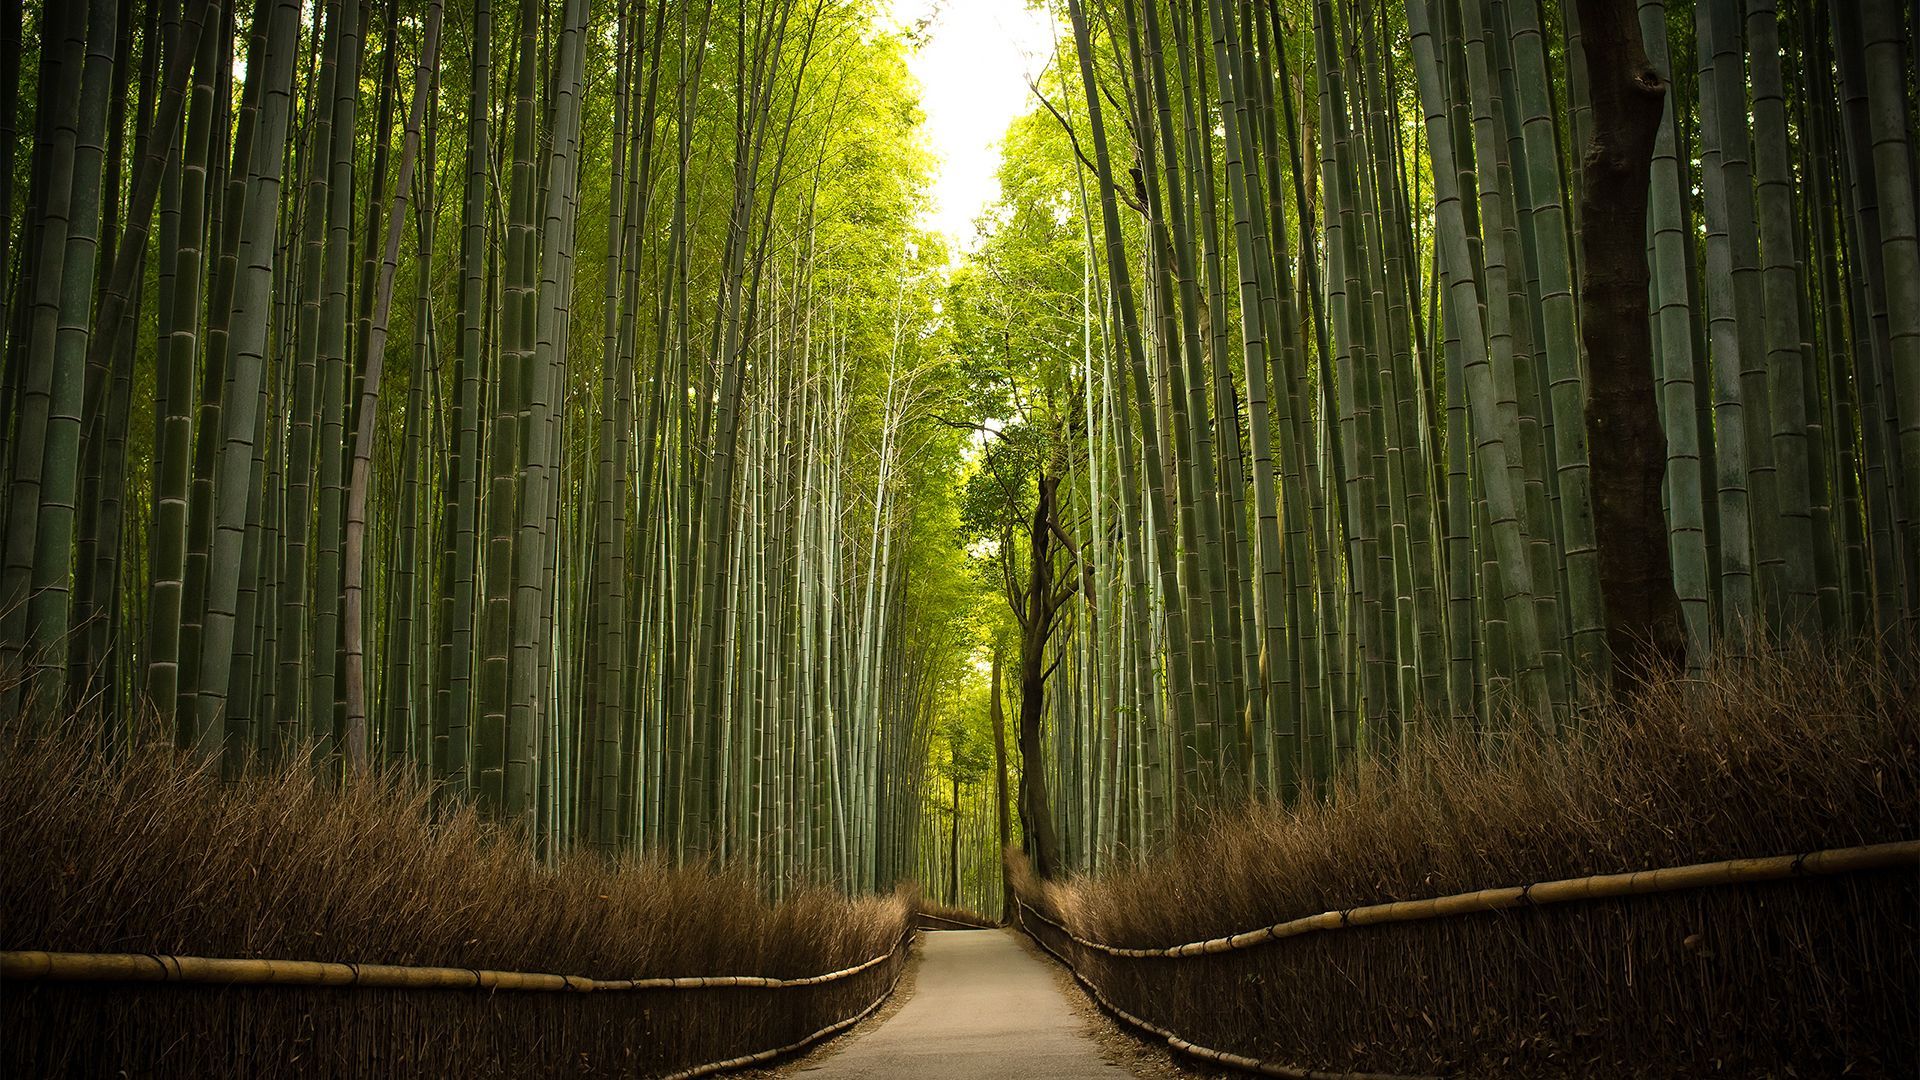 Bamboo Forest HD Wallpaper 1920x1080 ID26750